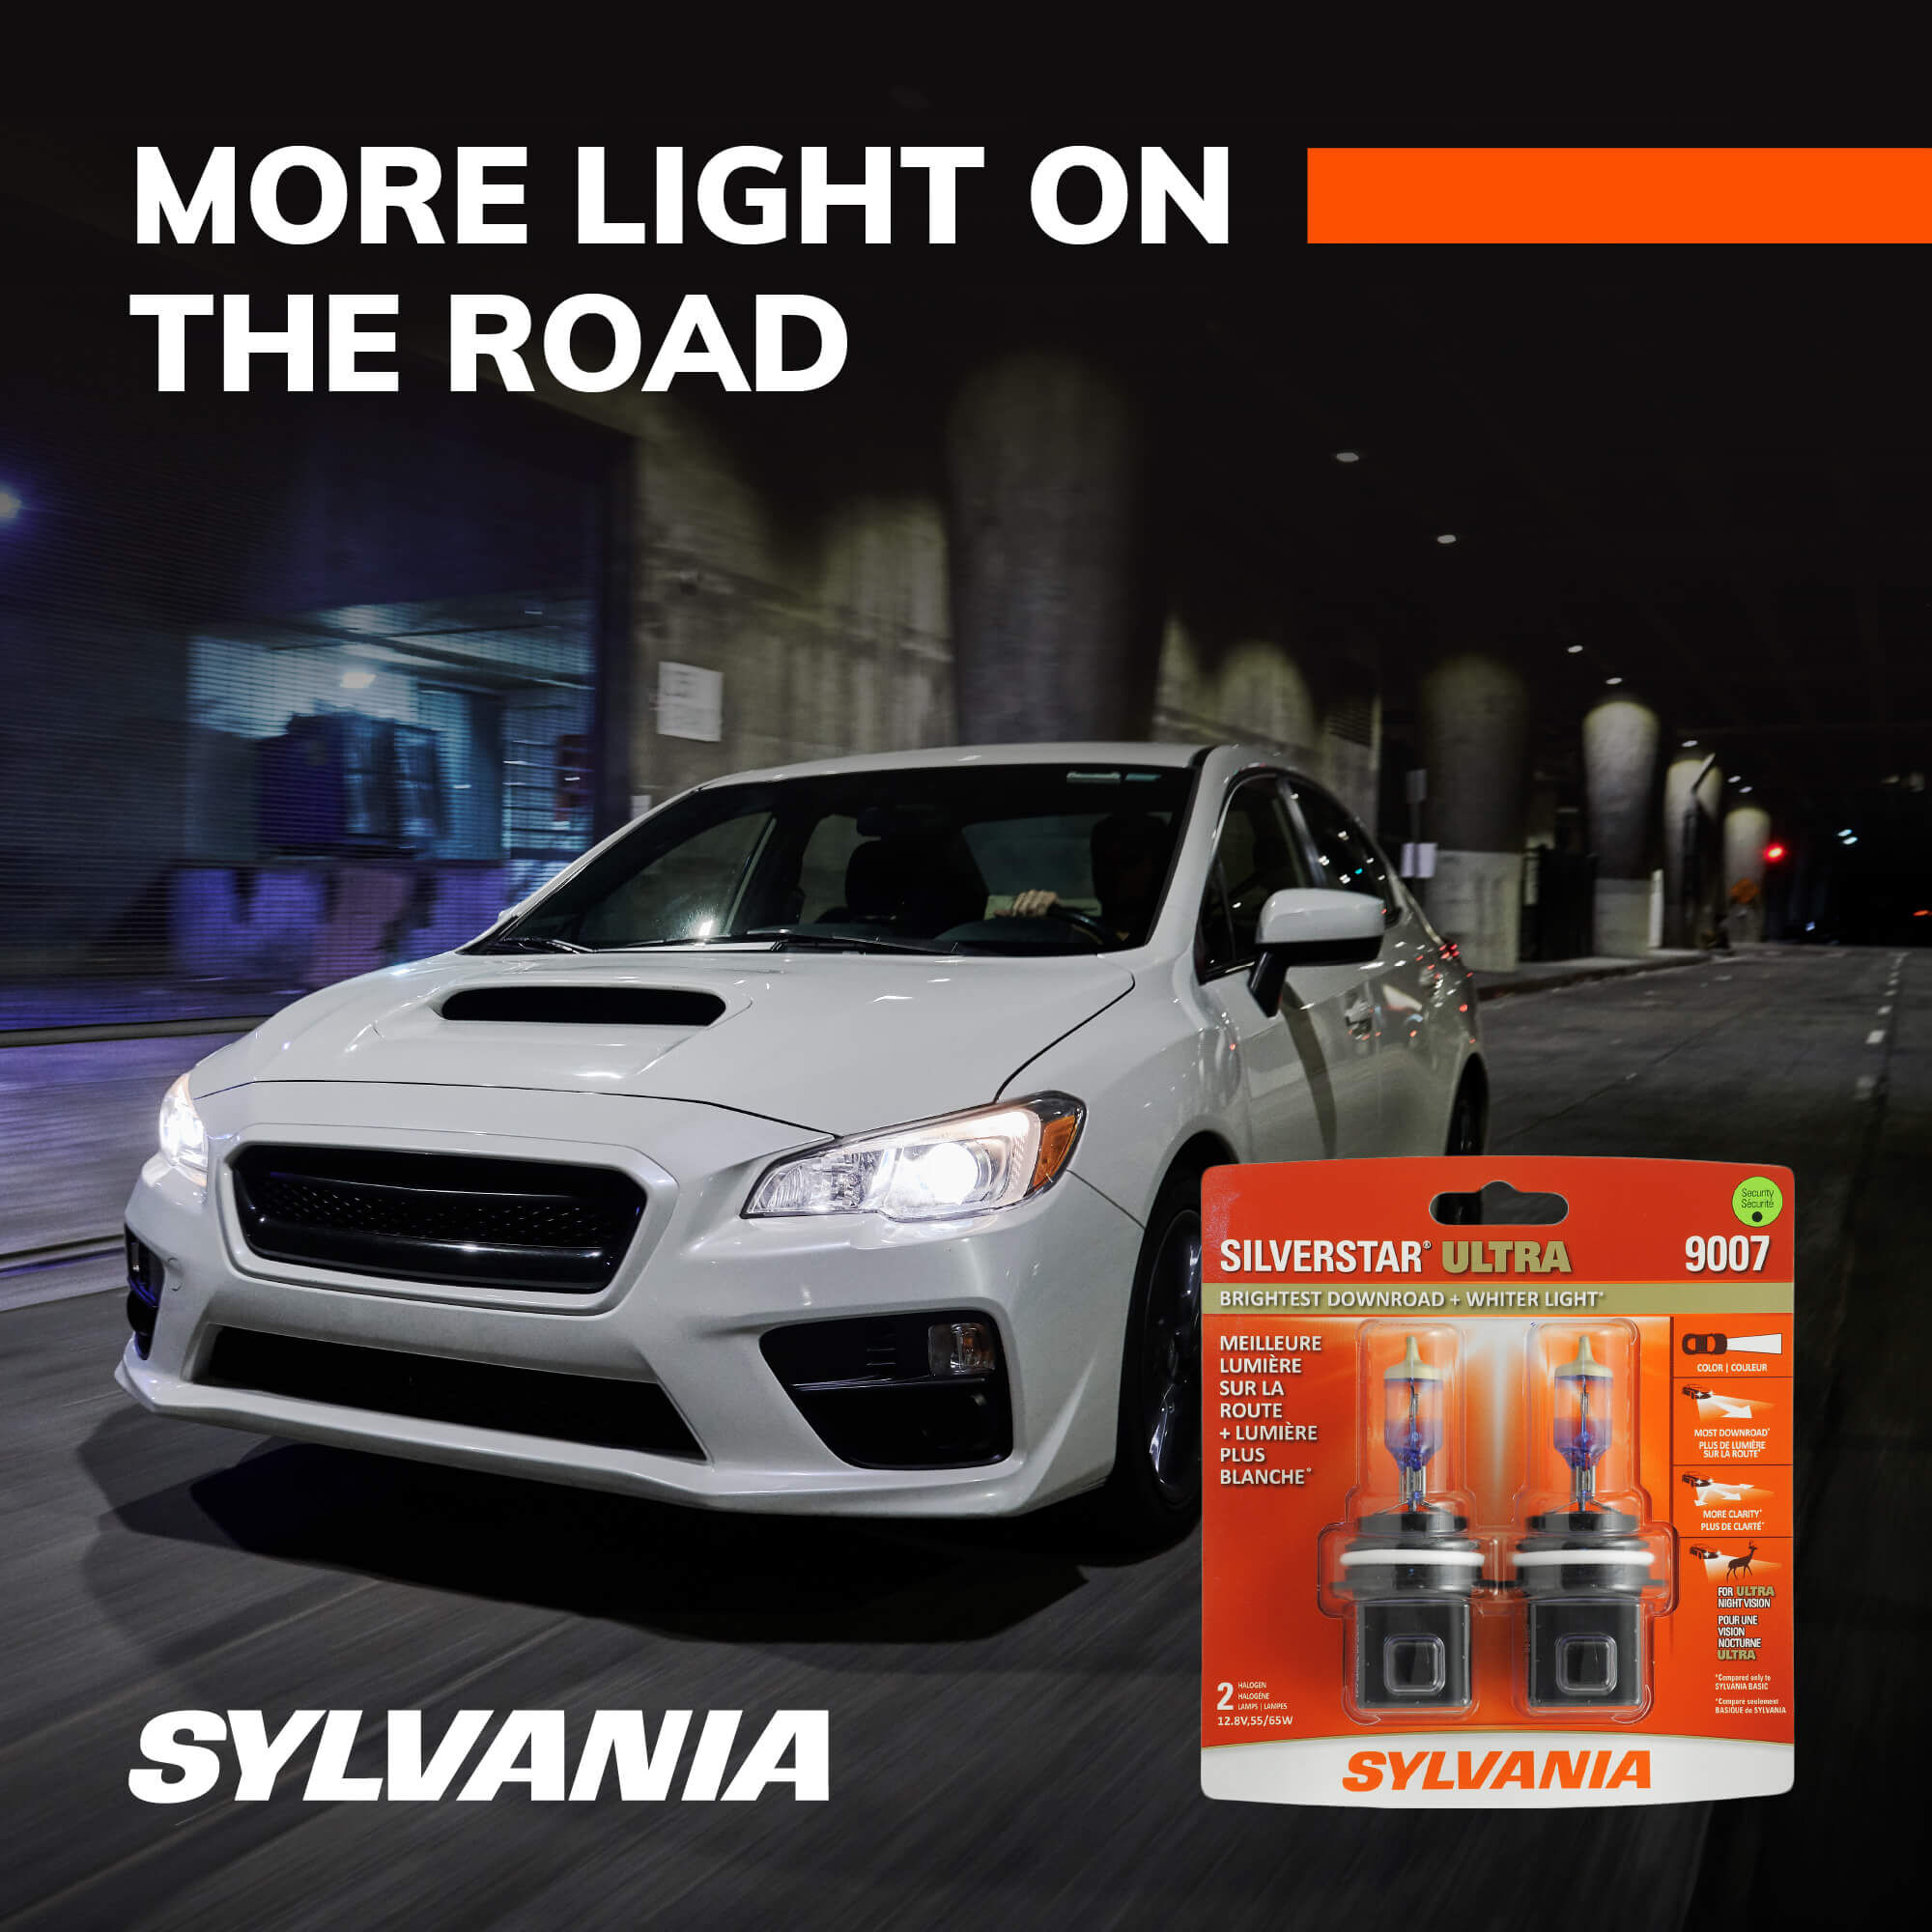 Contains 2 Bulbs 9007 SilverStar Ultra Brightest Downroad with Whiter Light Low Beam and Fog Replacement Bulb Tri-Band Technology SYLVANIA High Beam High Performance Halogen Headlight Bulb 